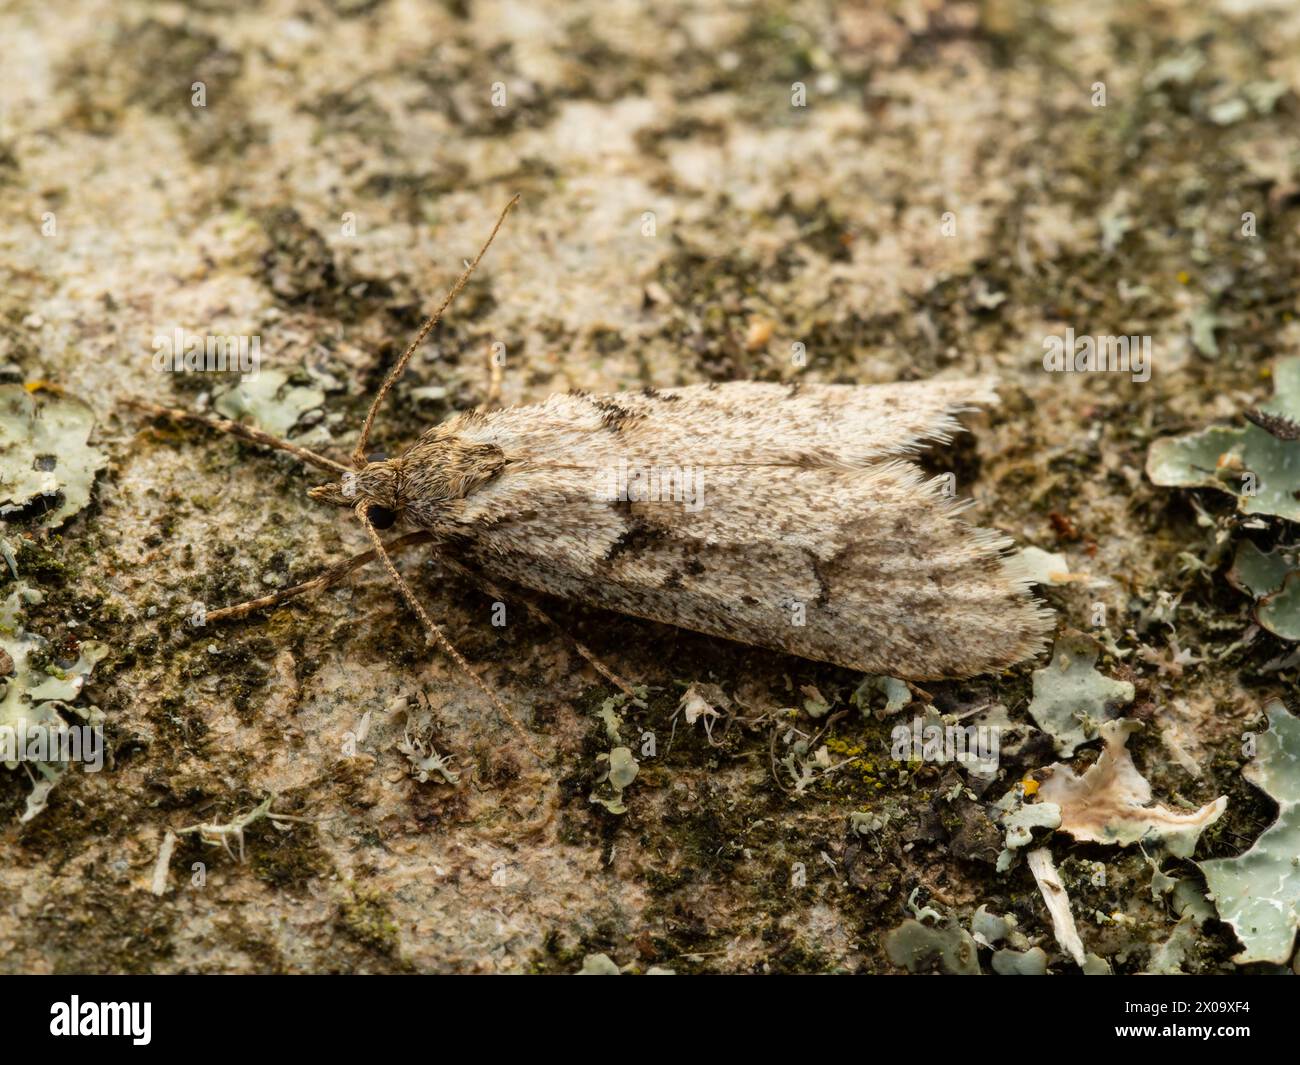 A March dagger moth (Diurnea fagella) also known as the March tubic moth, perched on a branch. Stock Photo